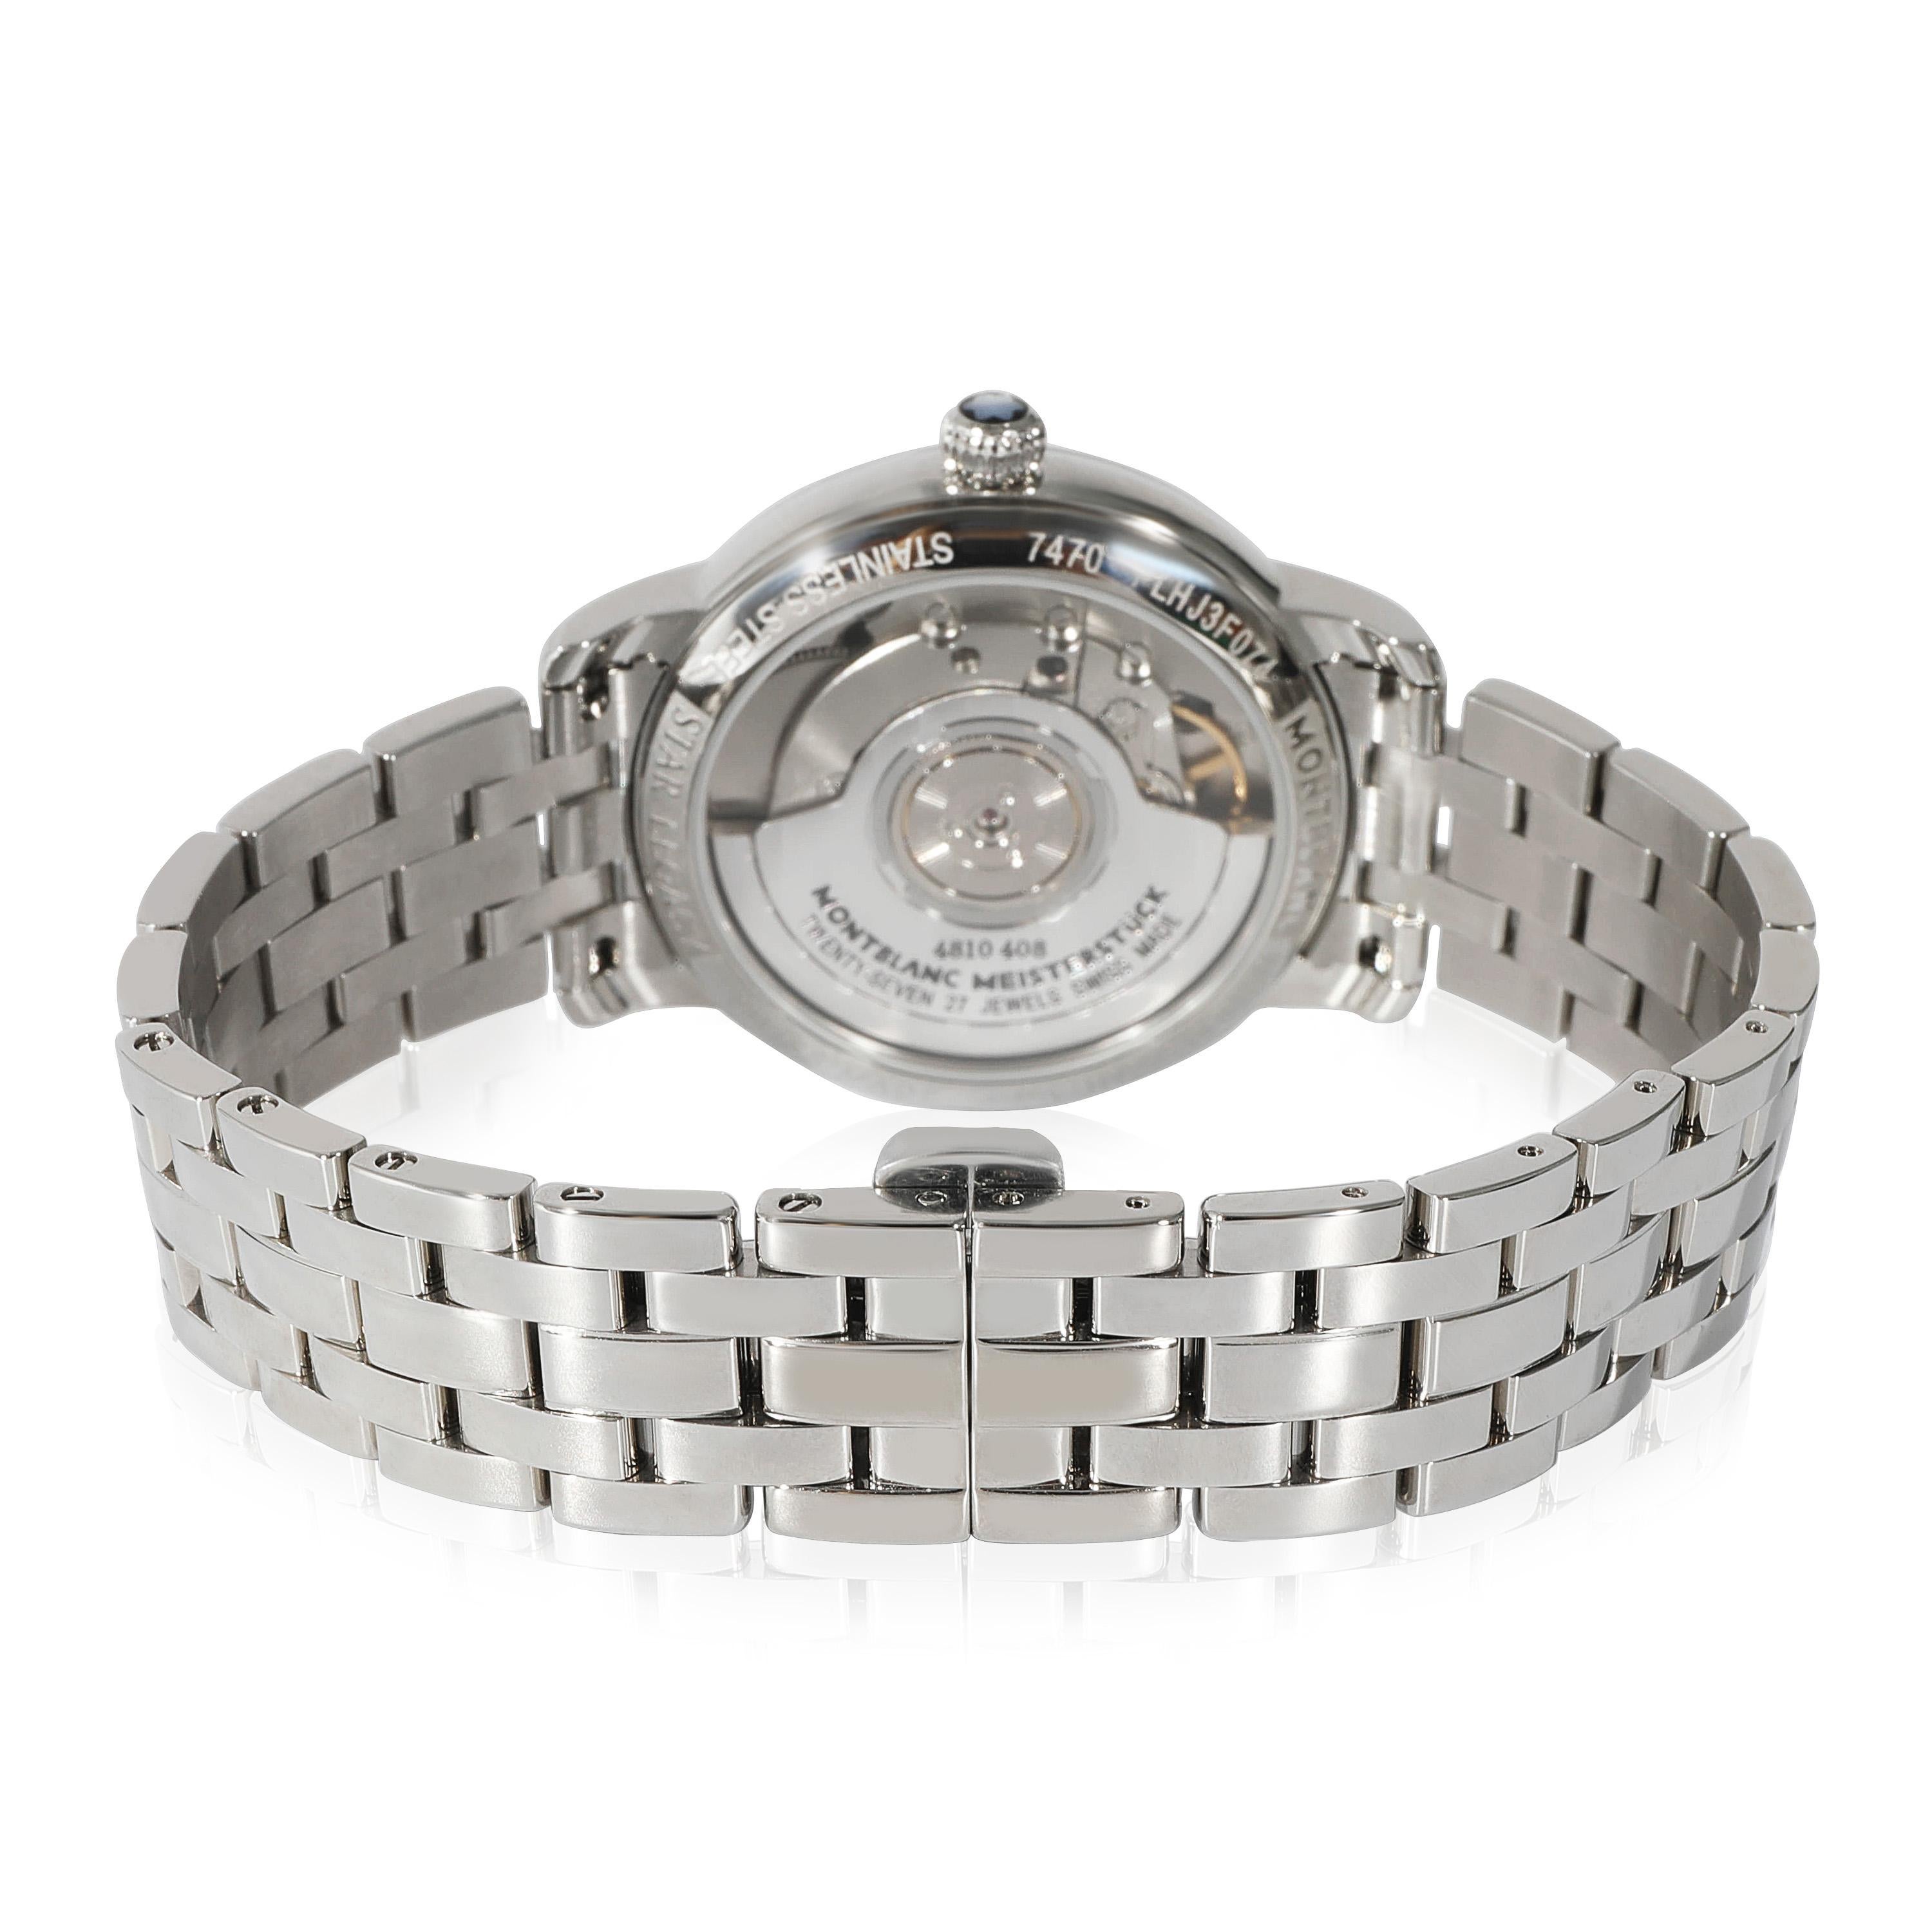 Montblanc Star Legacy 7470  118535 Women's Watch in  Stainless Steel

SKU: 132431

PRIMARY DETAILS
Brand: Montblanc
Model: Star Legacy
Country of Origin: Switzerland
Movement Type: Mechanical: Automatic/Kinetic
Year Manufactured: 2022
Year of